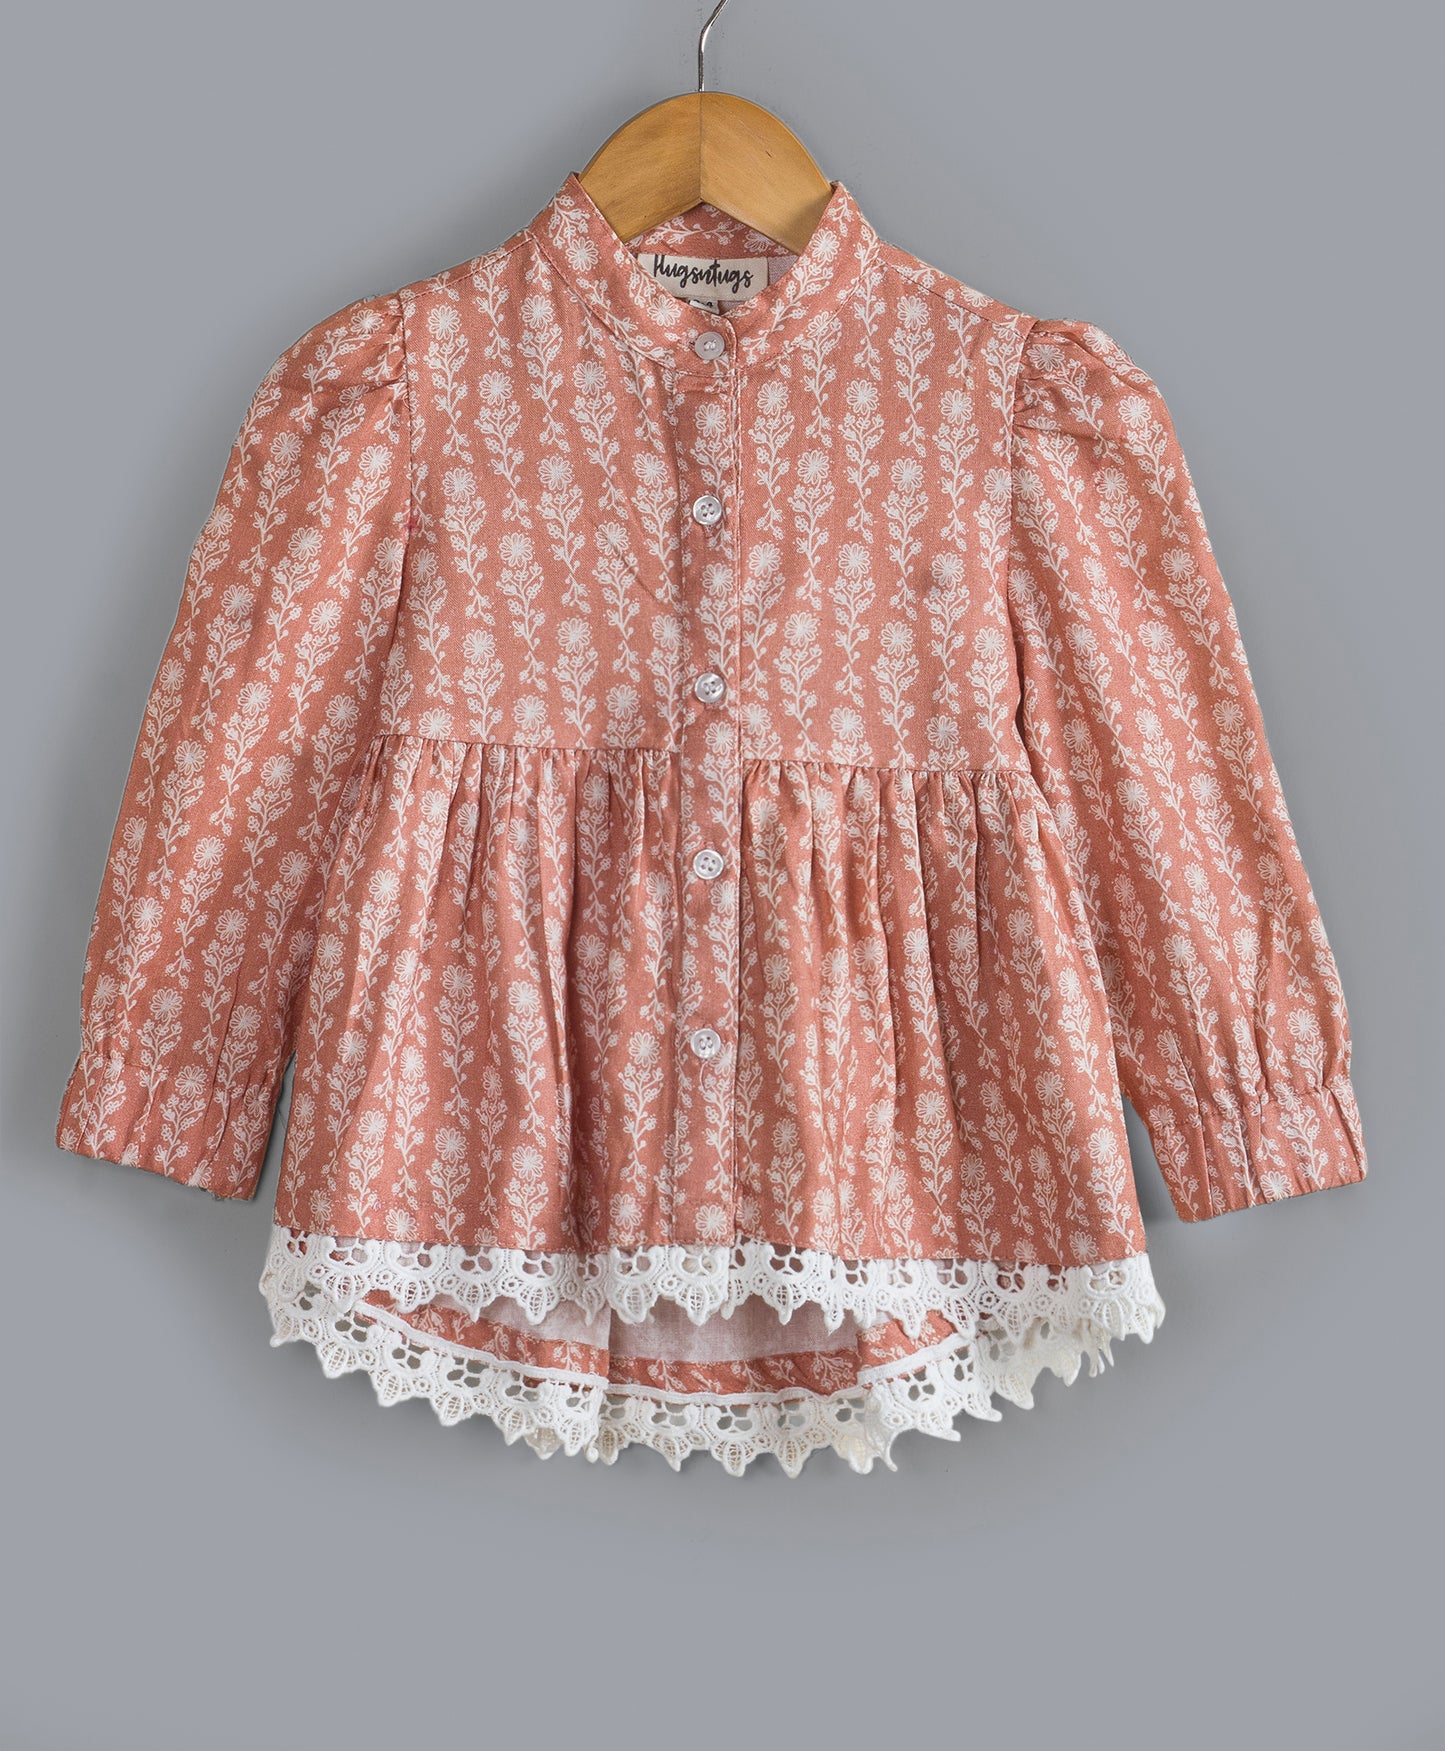 PEACH FLORAL TOP WITH LACE AT THE BOTTOM EDGE